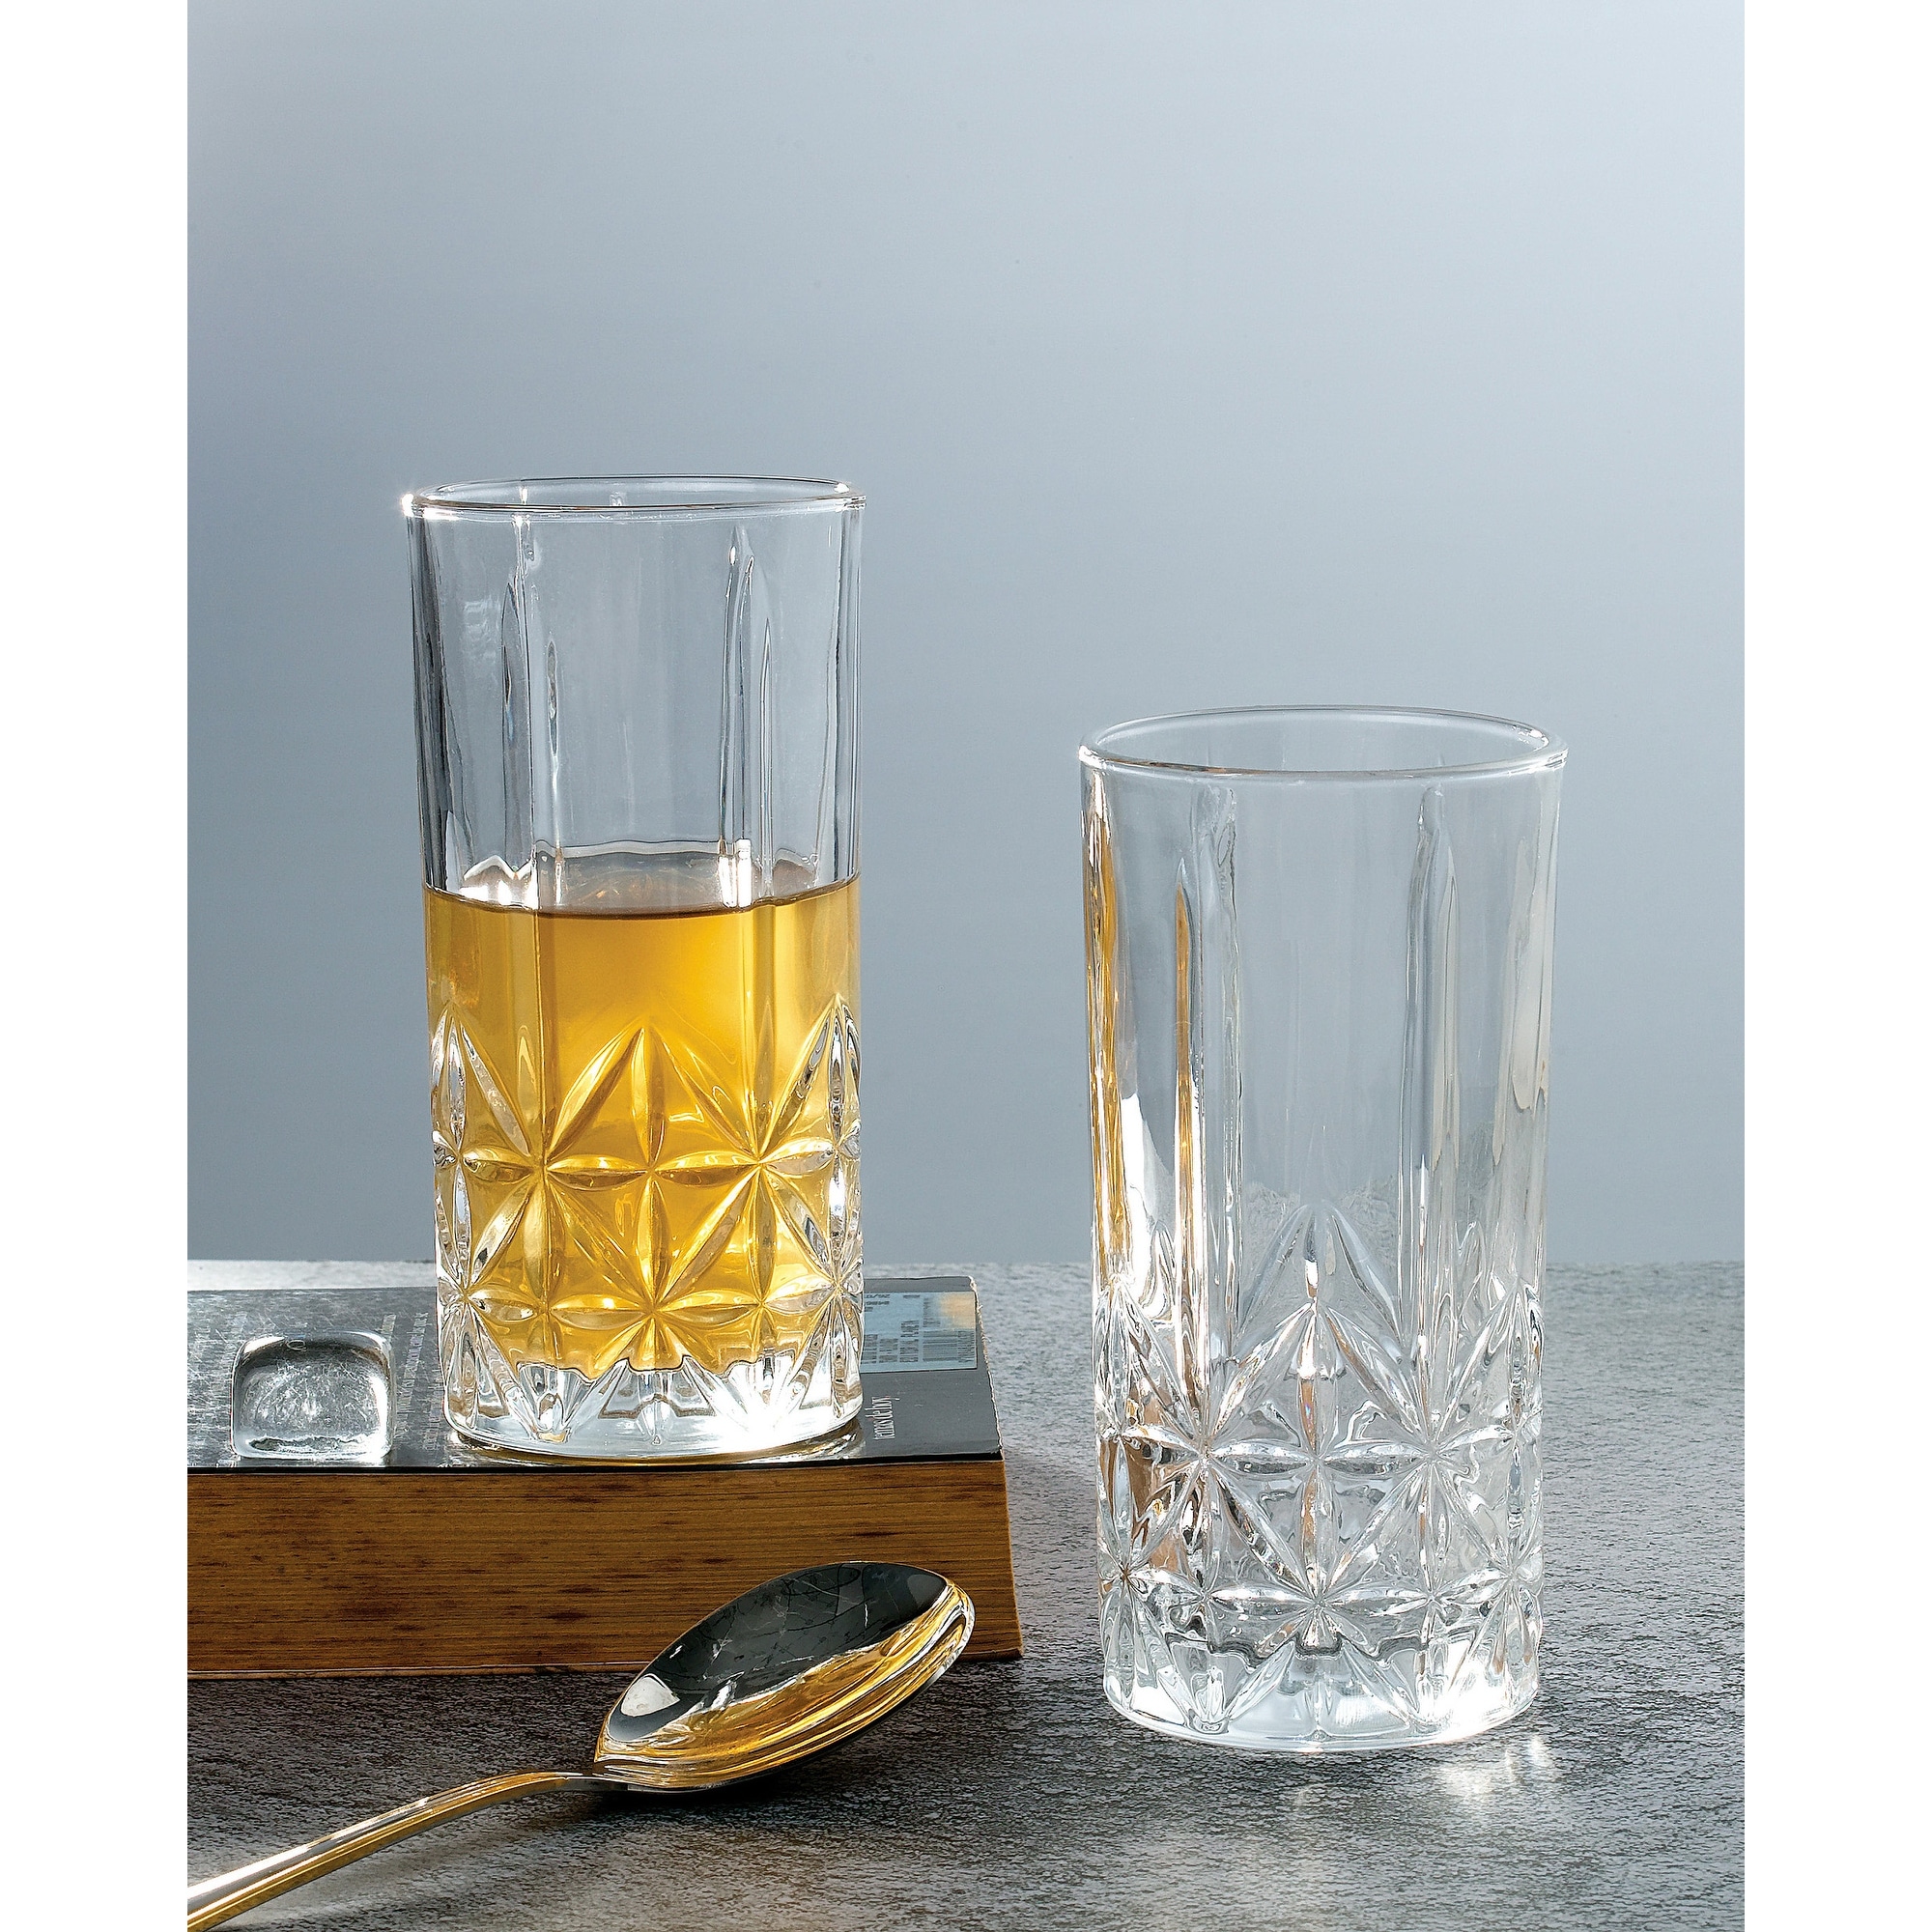 https://ak1.ostkcdn.com/images/products/is/images/direct/274b7afd2b47241b7590ccf59ad7edf57d372139/Lorren-Home-Trends-12-OZ.-Drinking-Glass-Textured-Cut-Glass%2C-Set-of-6.jpg